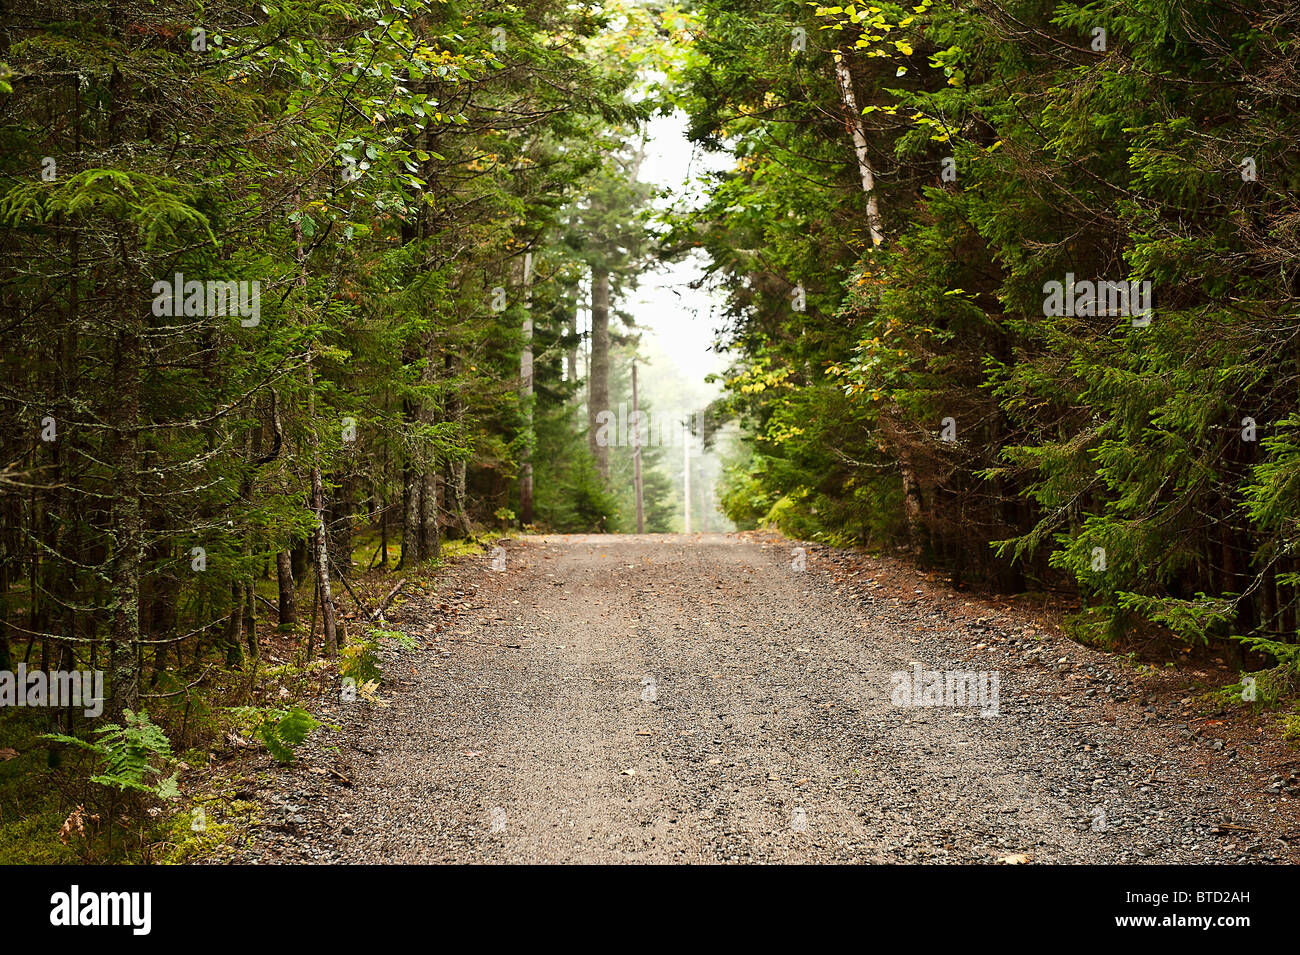 Unpaved road through evergreen forest, Maine, USA Stock Photo